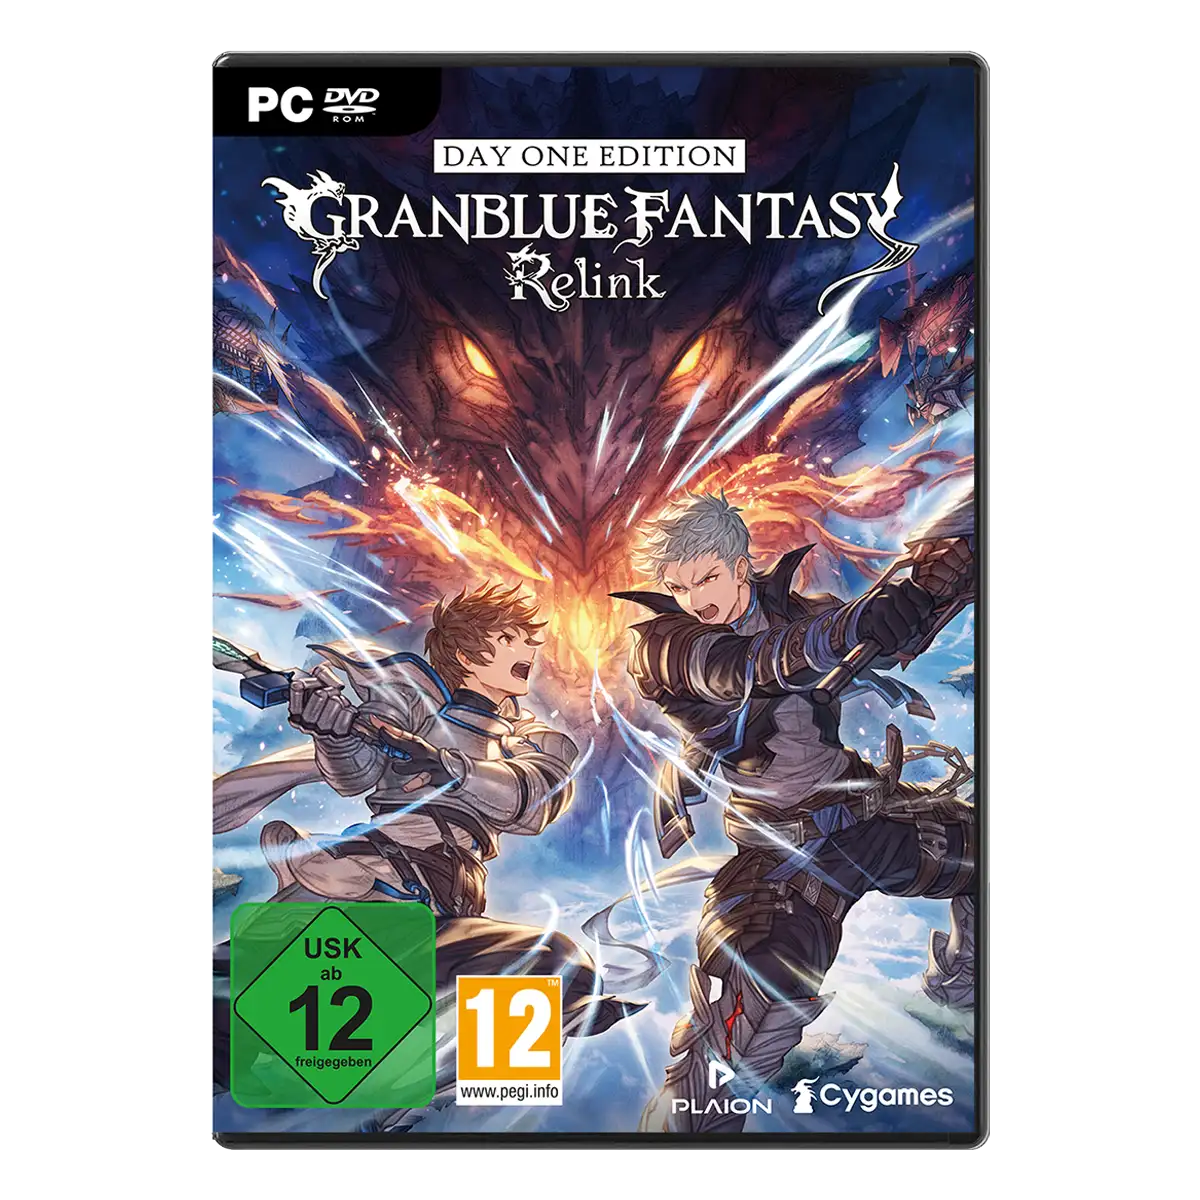 Granblue Fantasy Relink Day One Edition (PC) Cover